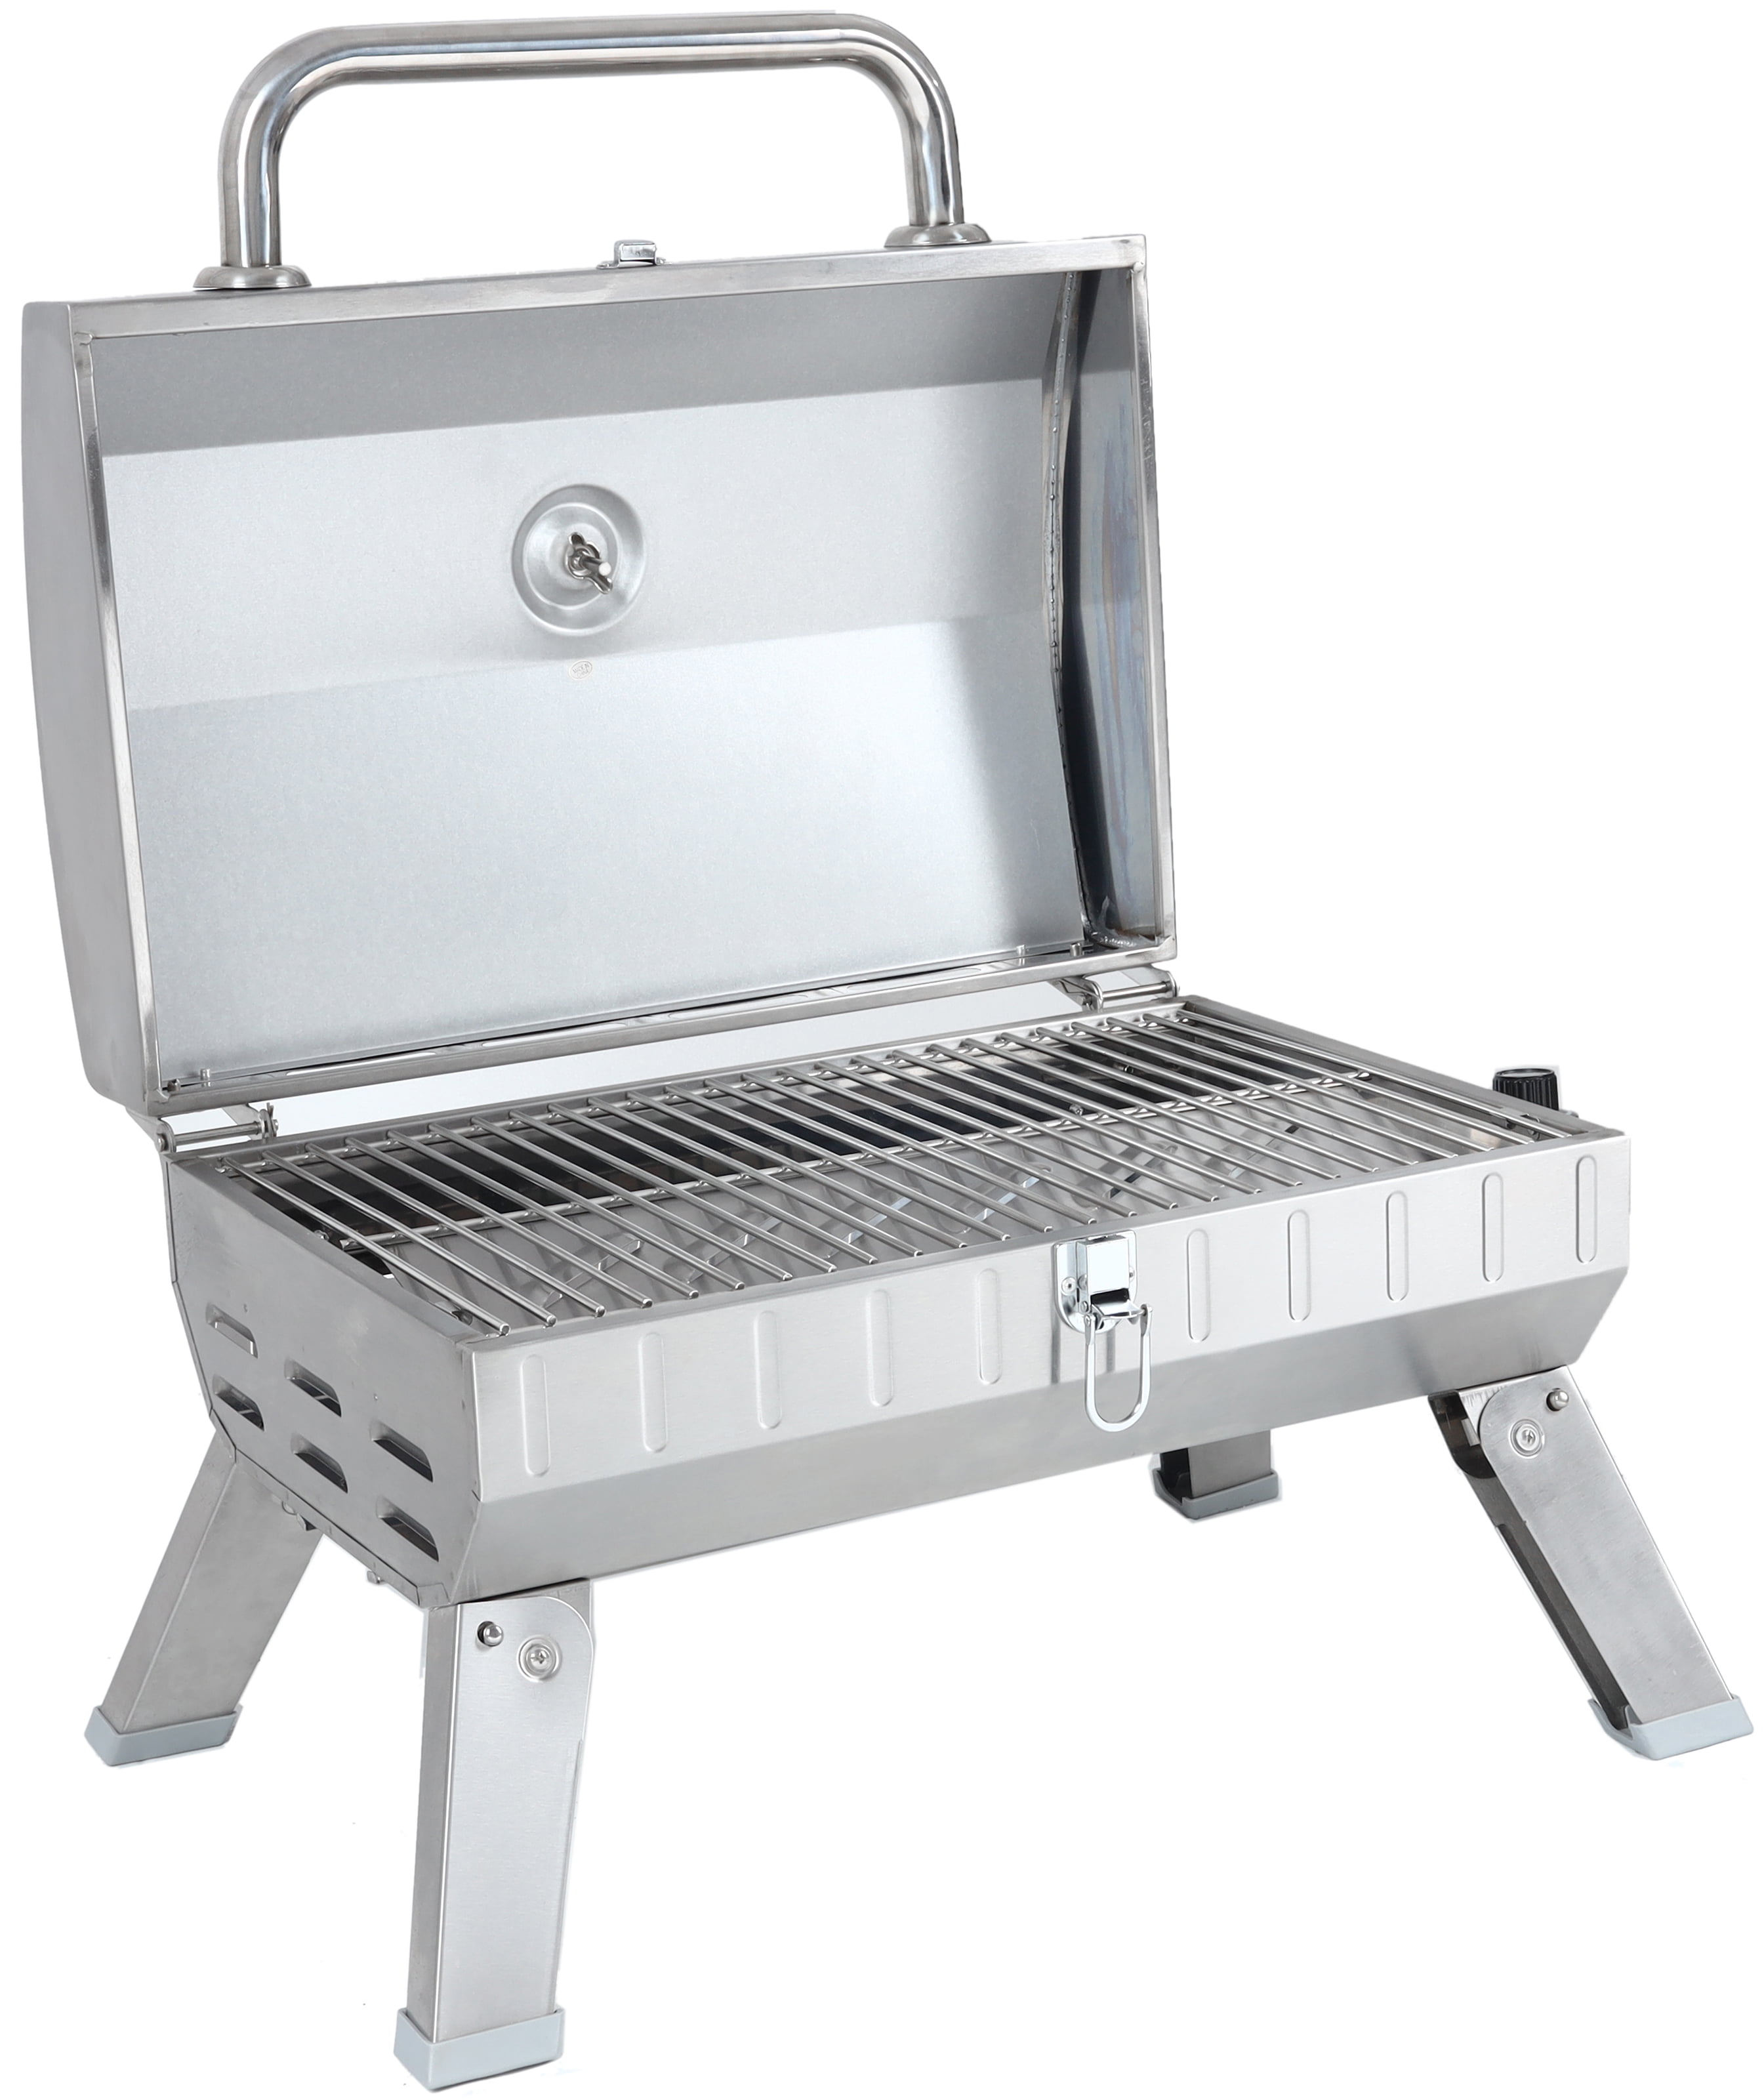 Expert Grill 10,000 BTU Portable Propane Gas Grill, Stainless Steel,  GBT1754W-C 